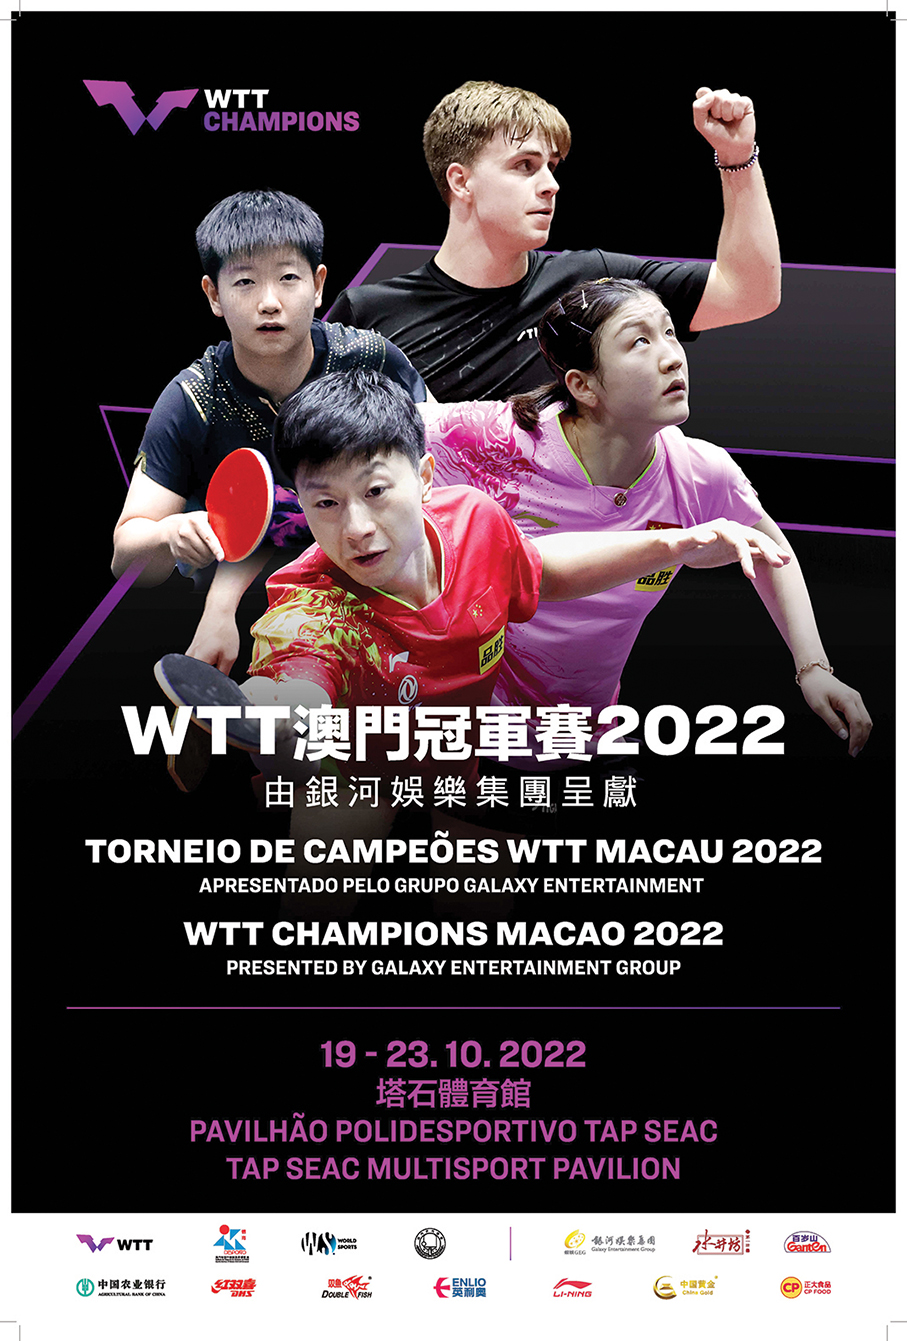 ‘WTT Champions Macao 2022’ slated for next month